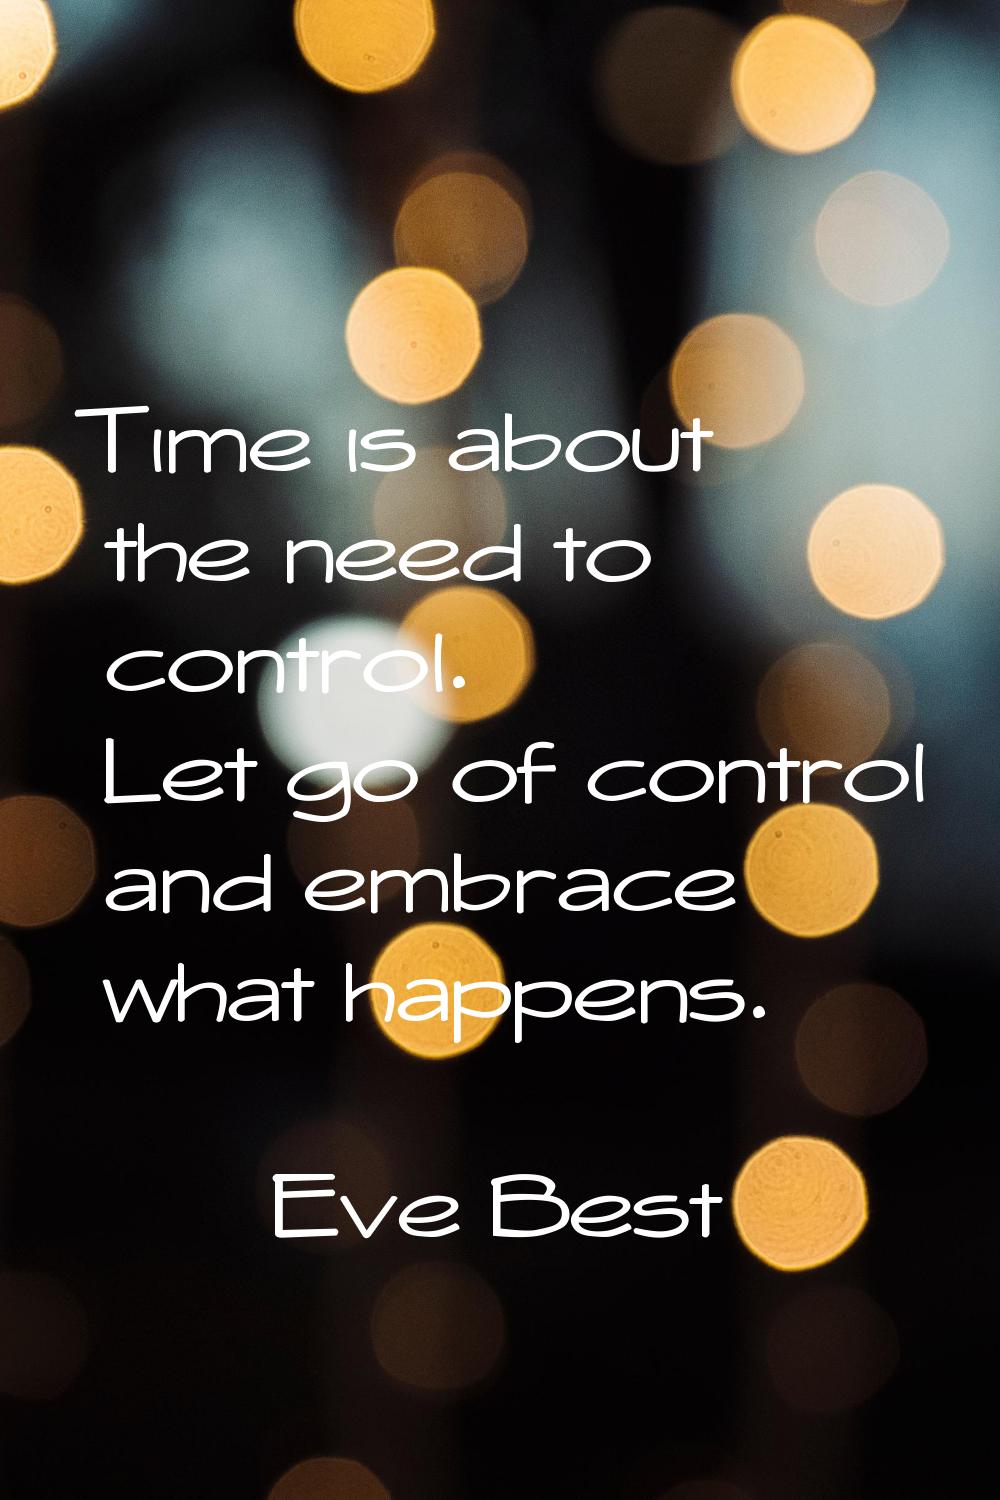 Time is about the need to control. Let go of control and embrace what happens.